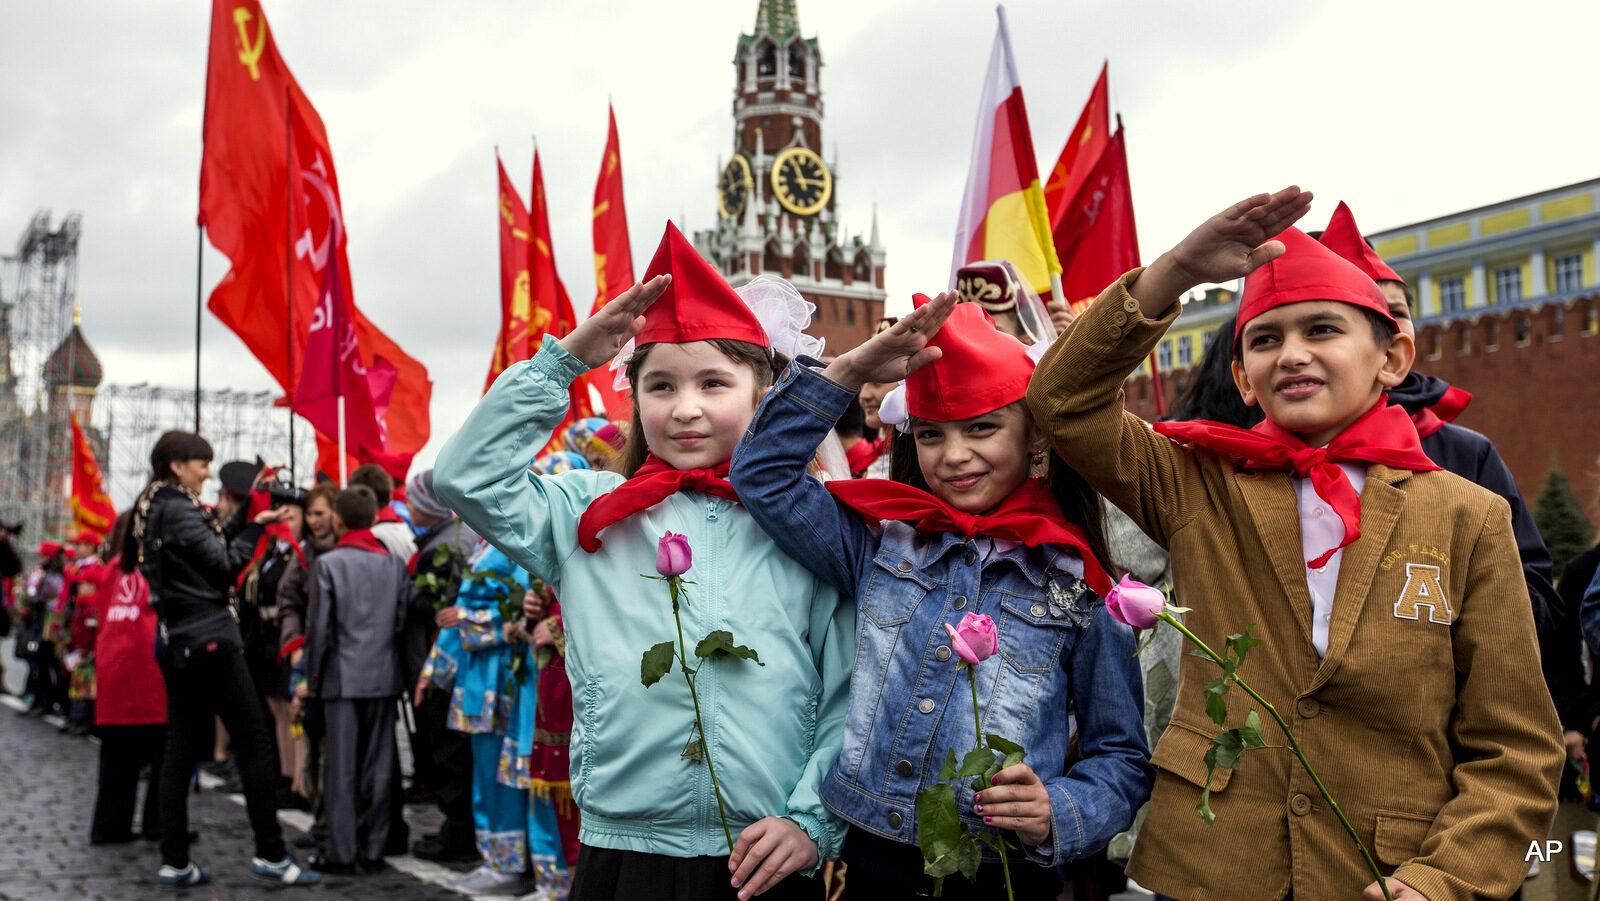 Girls and boys stand holding red neckerchiefs salute on Red Square, in front of the Spasslaya Tower, during a ceremony to celebrate joining the Pioneers organization, in Moscow, Russia, Sunday, May 17, 2015. Pro-Communist Russians try to preserve the Young Pioneers, which used to be the Communist league for pre-teens in the Soviet Union.